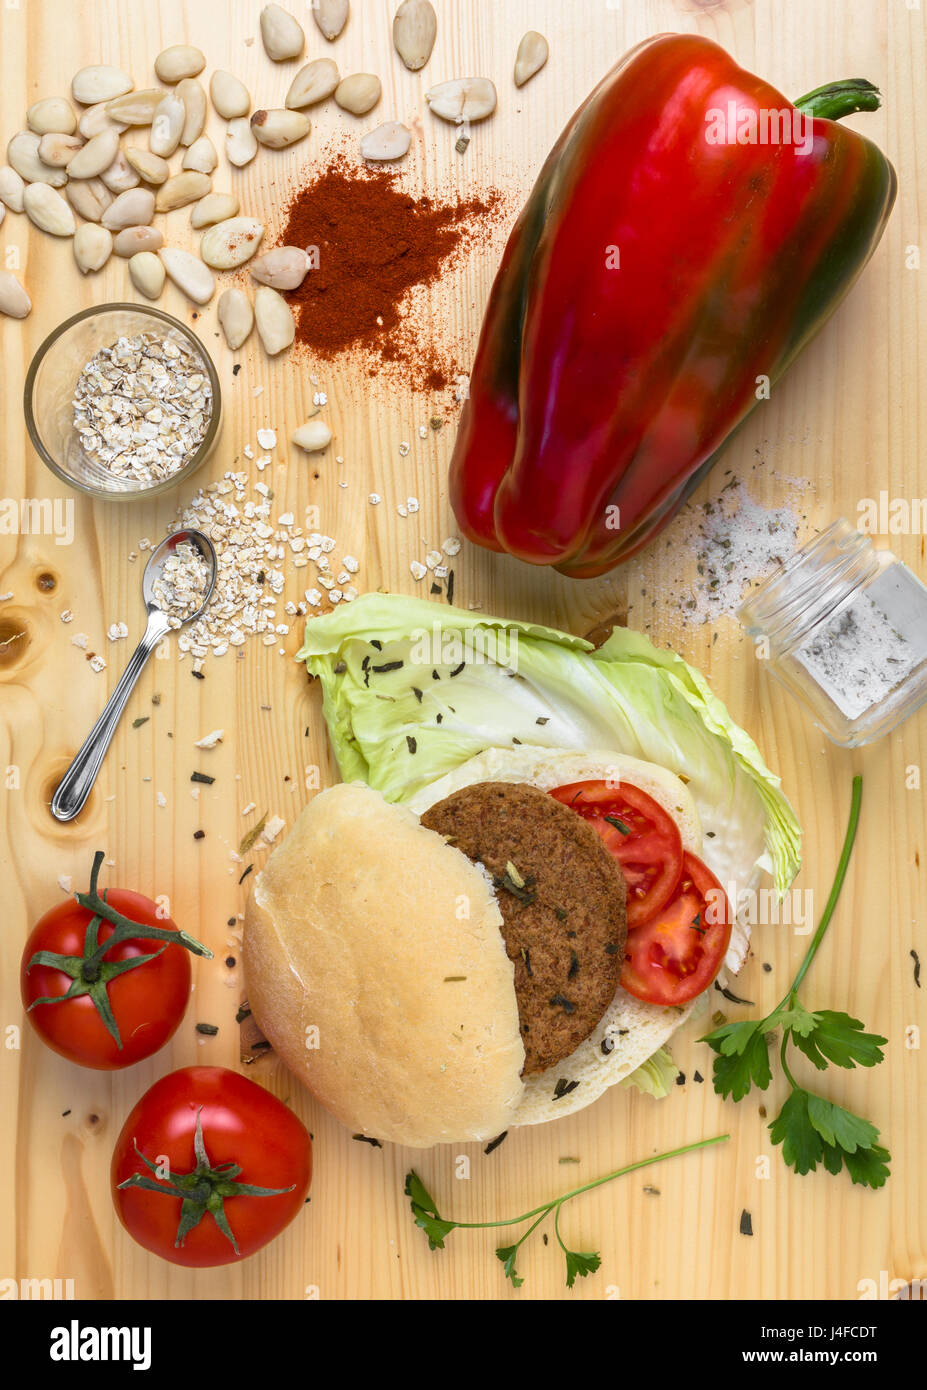 Homemade veg burger with ingredients, on a light wooden background. Top view. Stock Photo